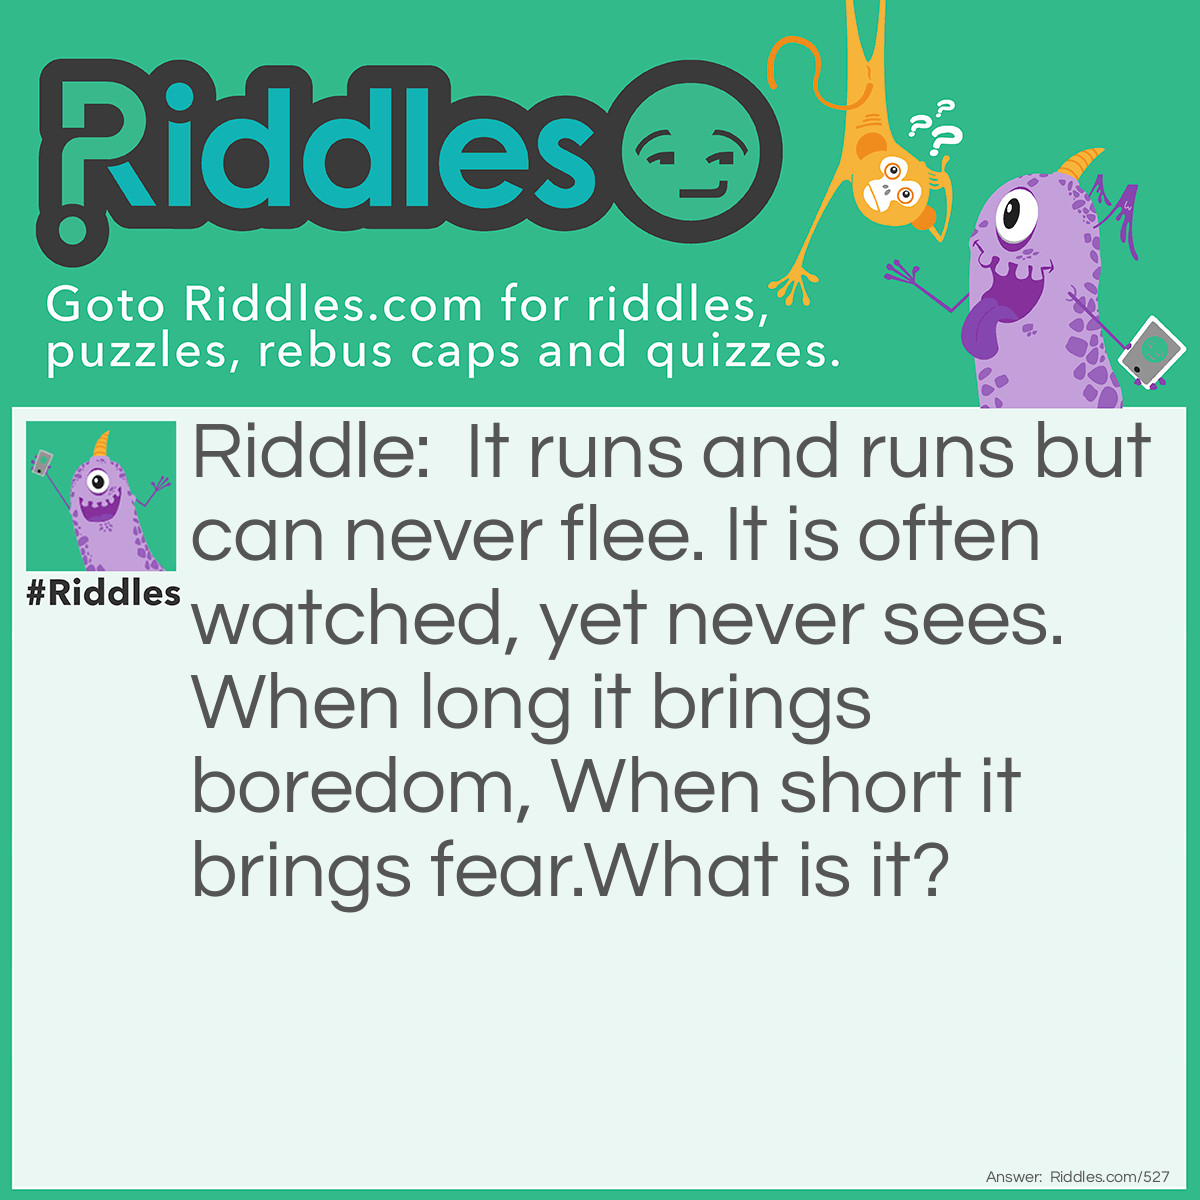 Riddle: It runs and runs but can never flee. It is often watched, yet never sees. When long it brings boredom, When short it brings fear.
What is it? Answer: Time, which is often watched when you stare at a clock.